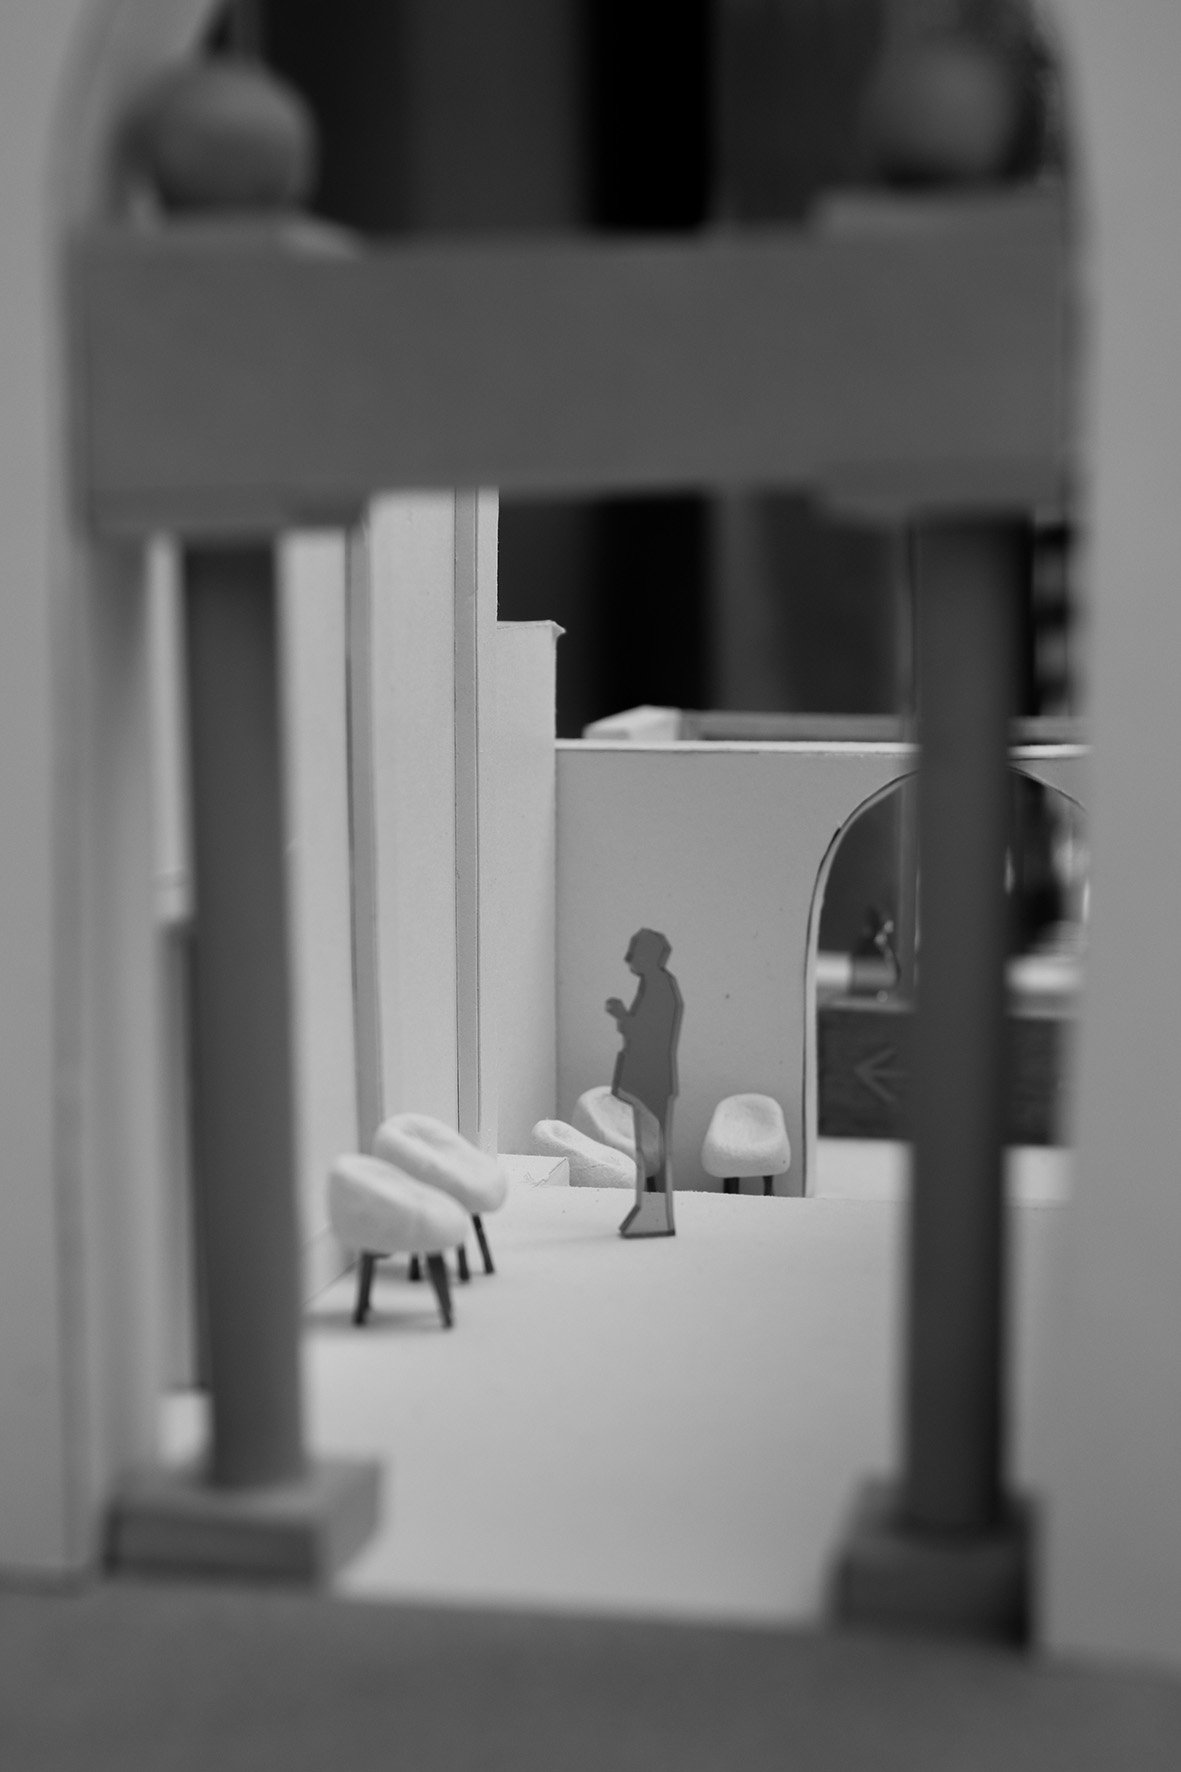 The image of a world in miniature, between dream and reality, which allows us to relieve those moments in which we imagined playing something, recreating emotions to rediscover memories that were believed to be lost, like Marcel Proust in his “Recherche”.